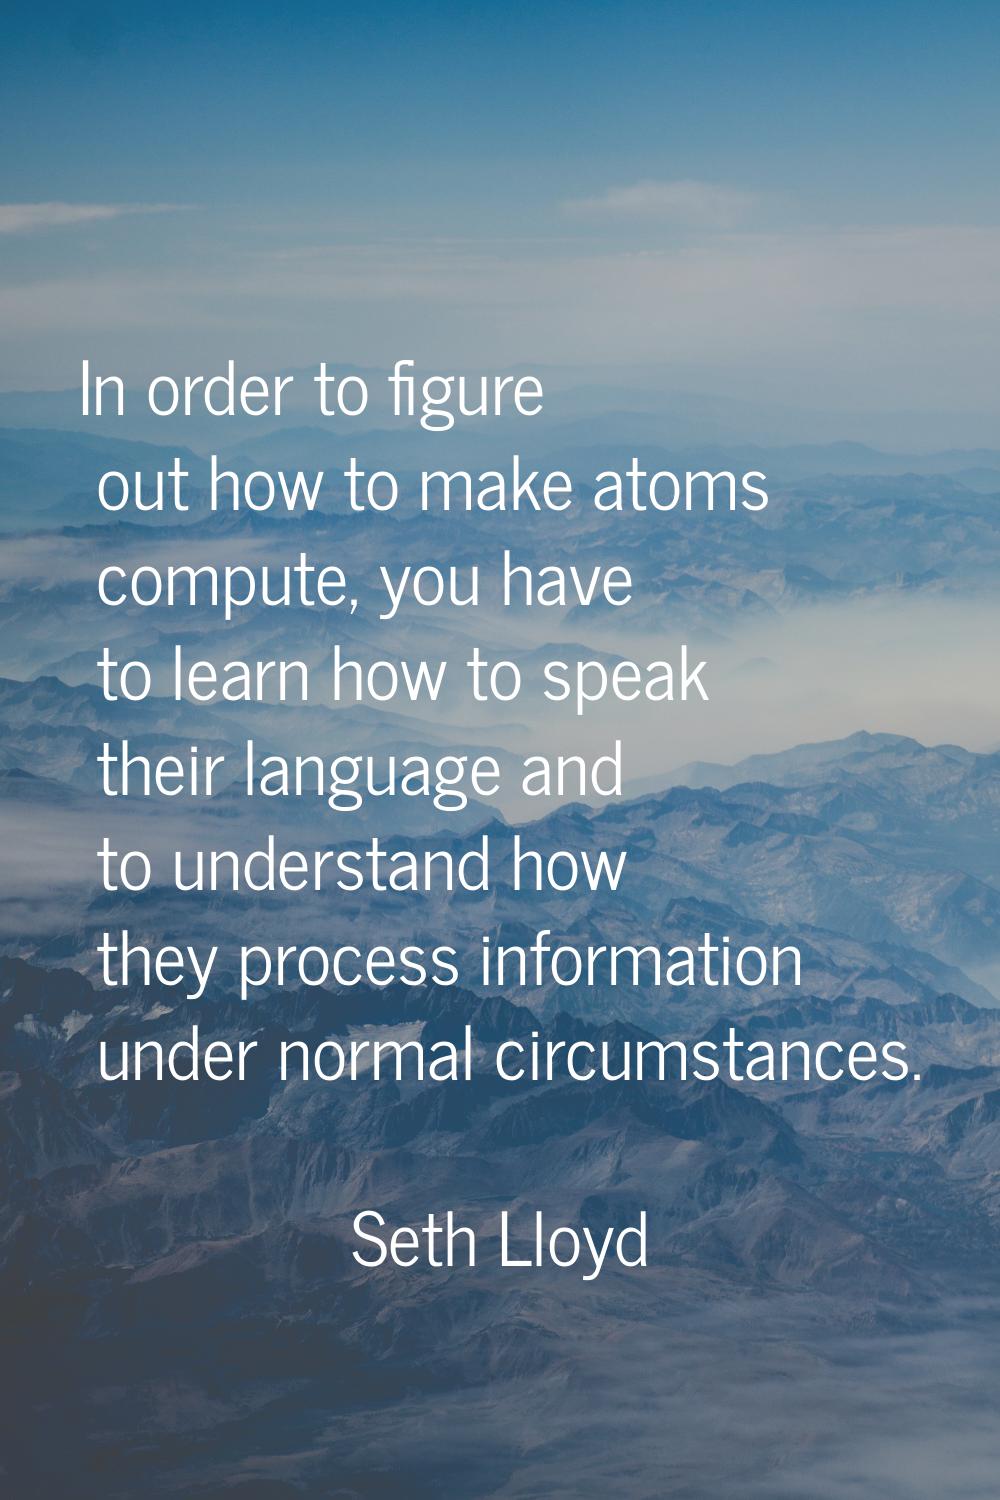 In order to figure out how to make atoms compute, you have to learn how to speak their language and